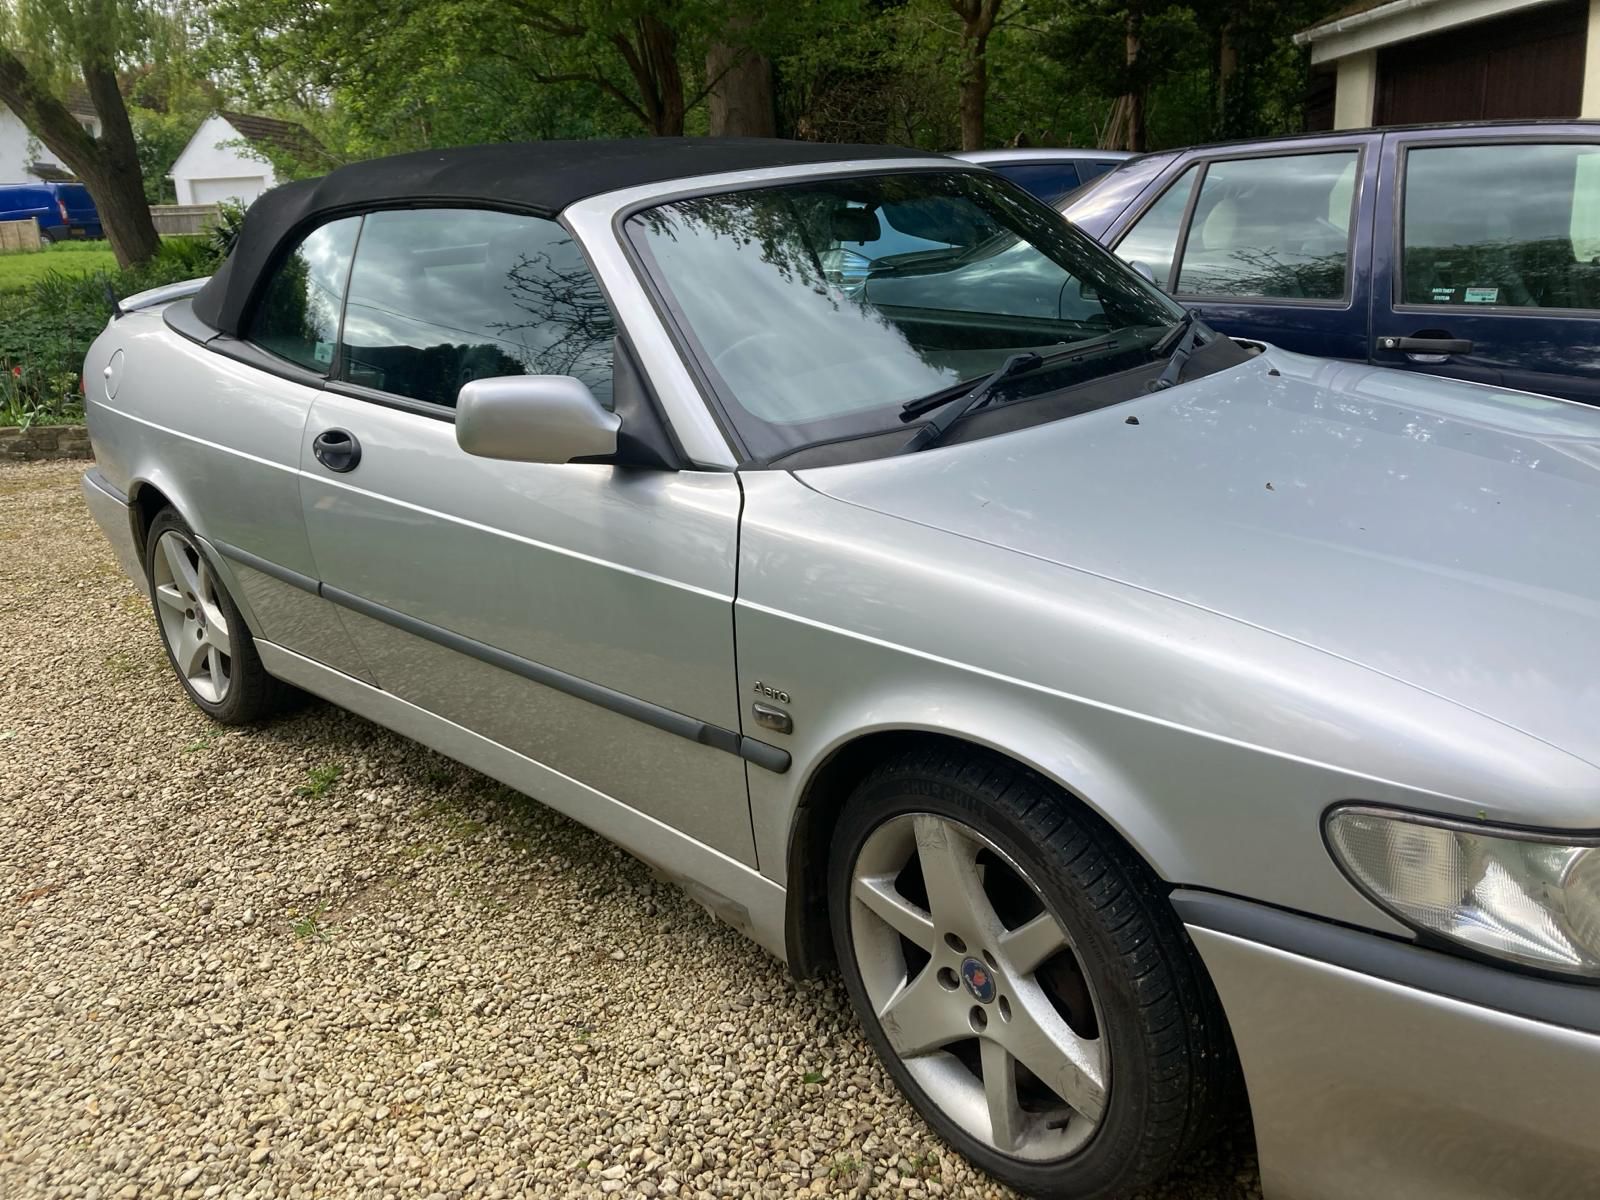 2002 Saab 9-3 Aero Convertible with 11 months MOT - Offered at No Reserve - Image 4 of 24